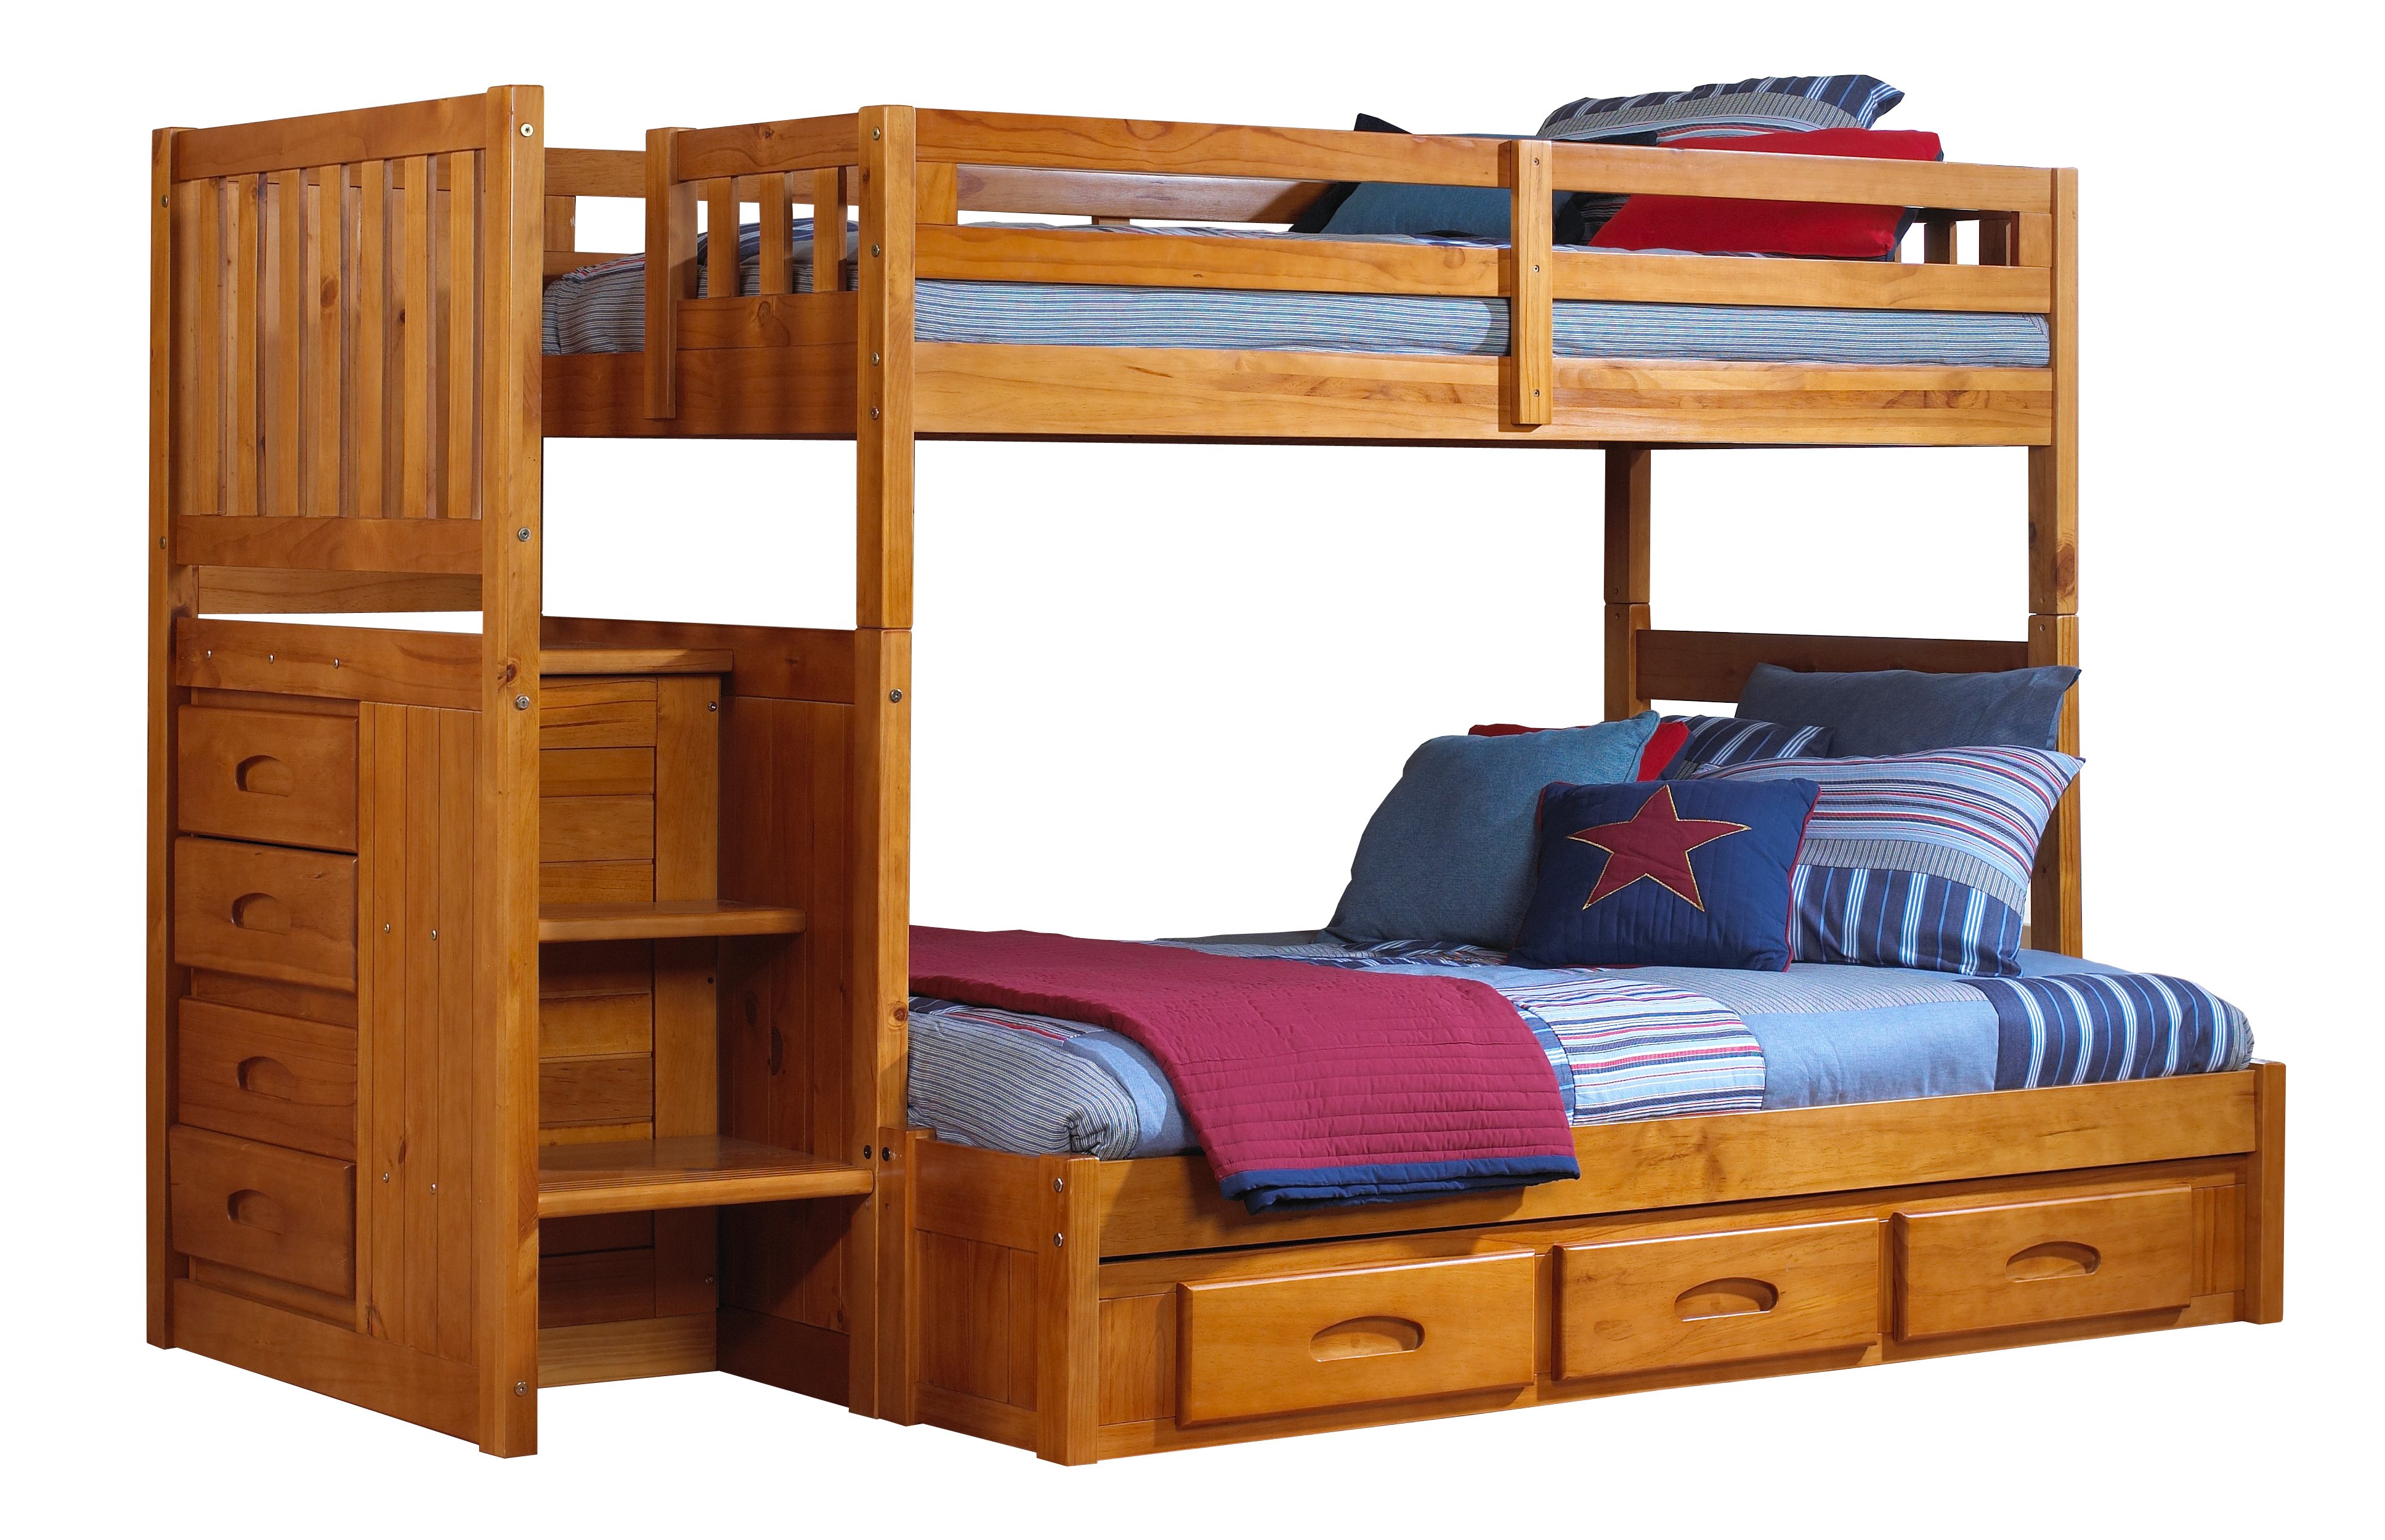 Honey Staircase Bunk Bed, Mission Twin Over Full Bunk Bed